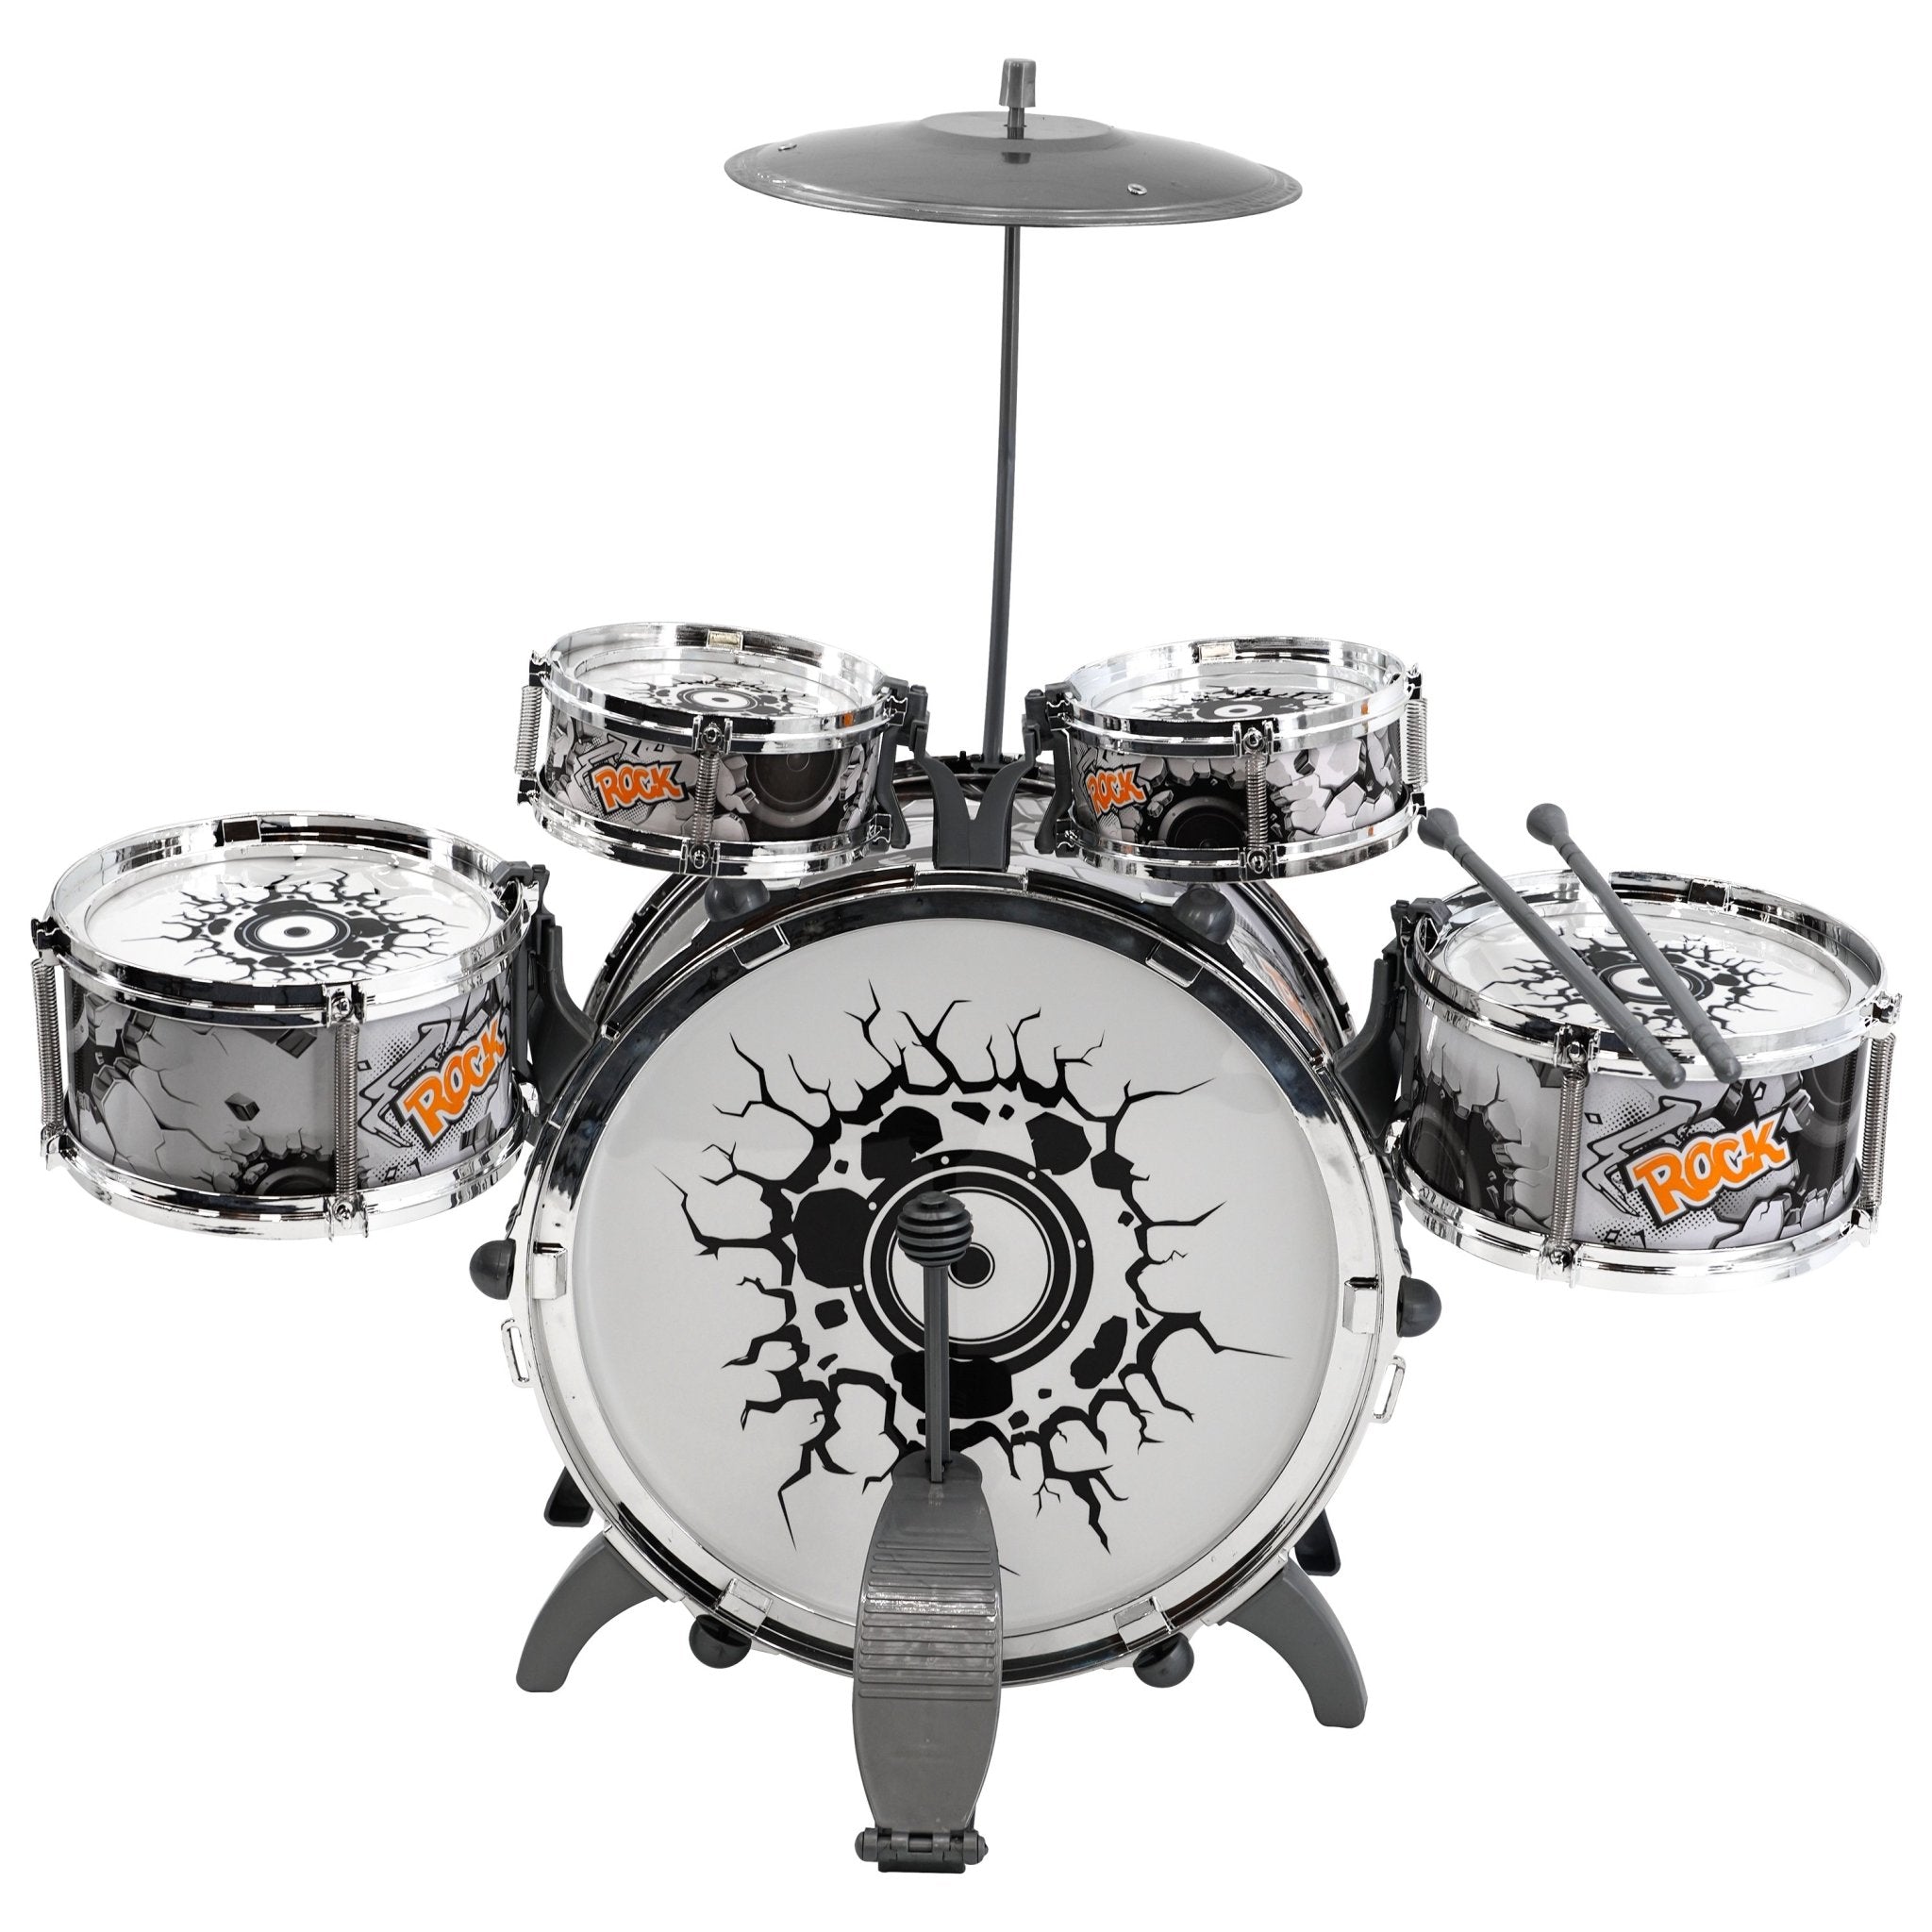 Kids Black and White Drum Kit Play Set The Magic Toy Shop - The Magic Toy Shop